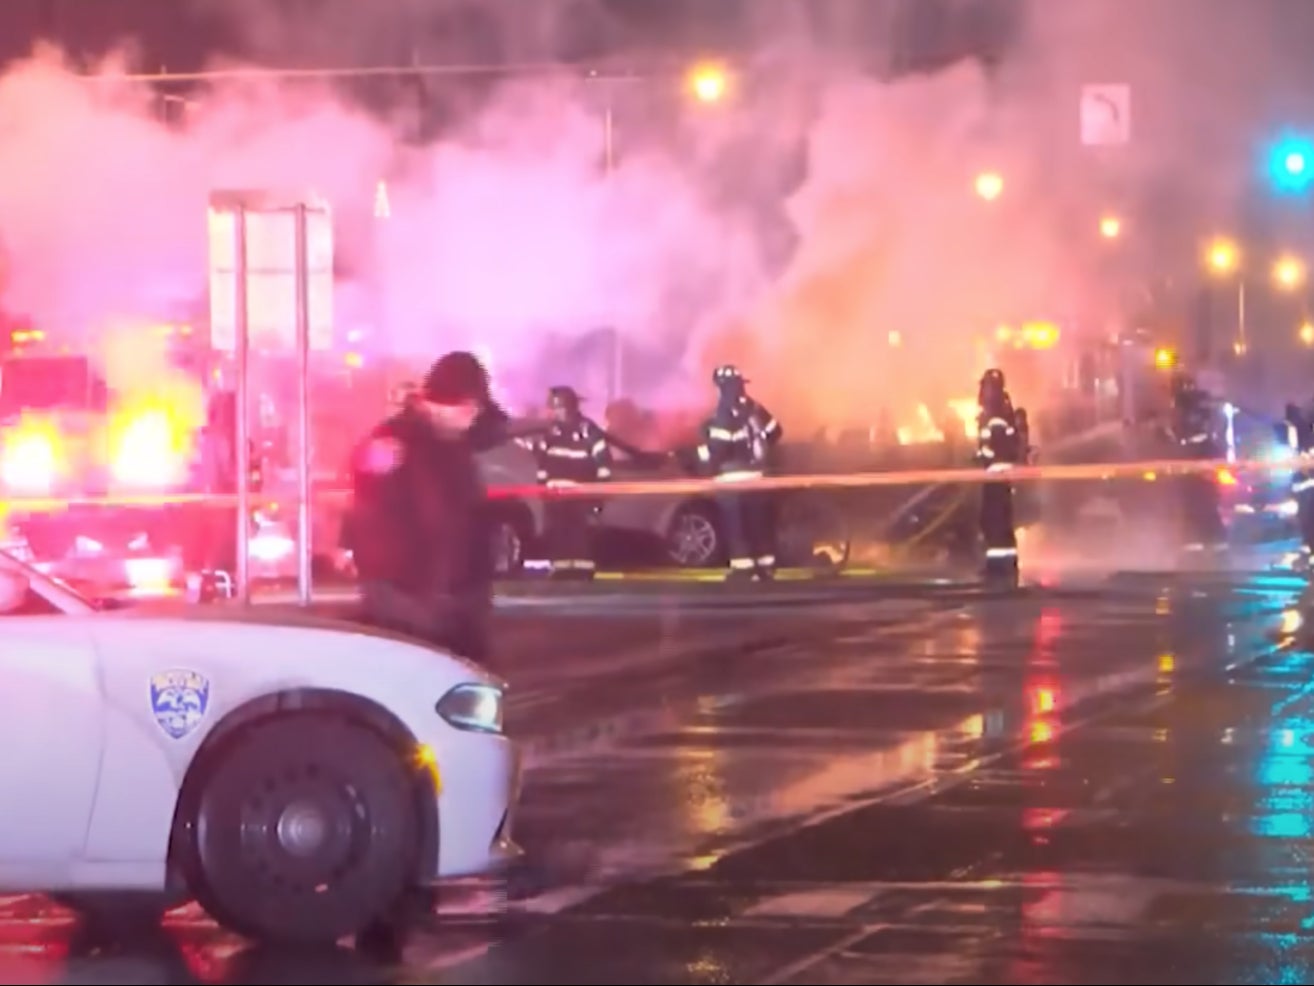 Police and firefighters in Rochester, New York, battle a blaze at the scene of a fiery New Year’s Eve car crash that killed two